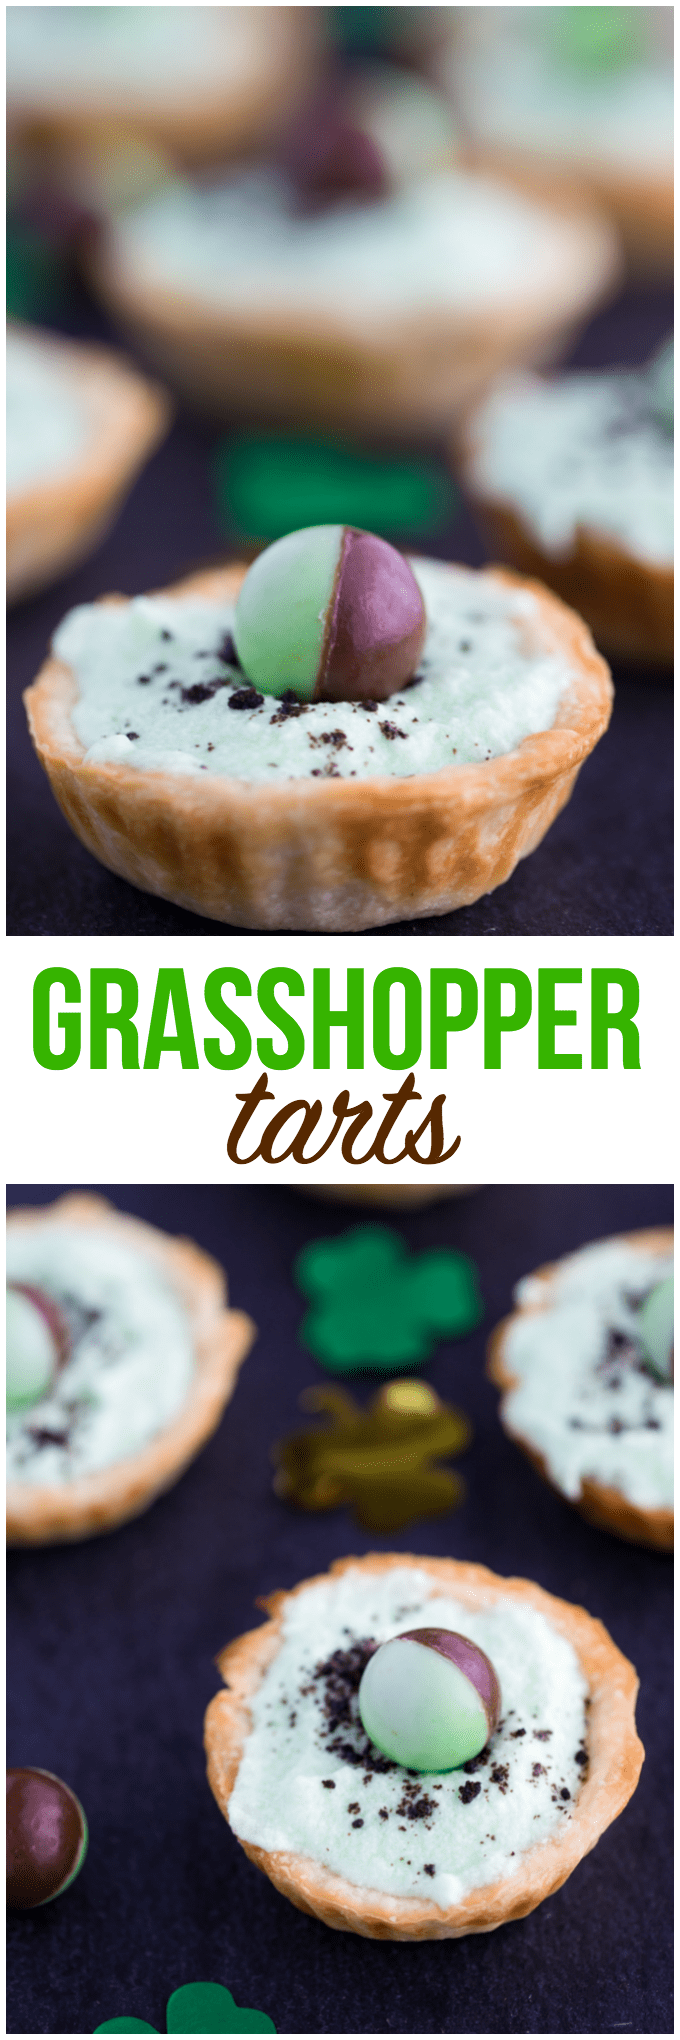 Grasshopper Tarts - Made for mint chocolate chip lovers! These adorable, minty mini tarts are perfect for St. Patrick's Day or a birthday.